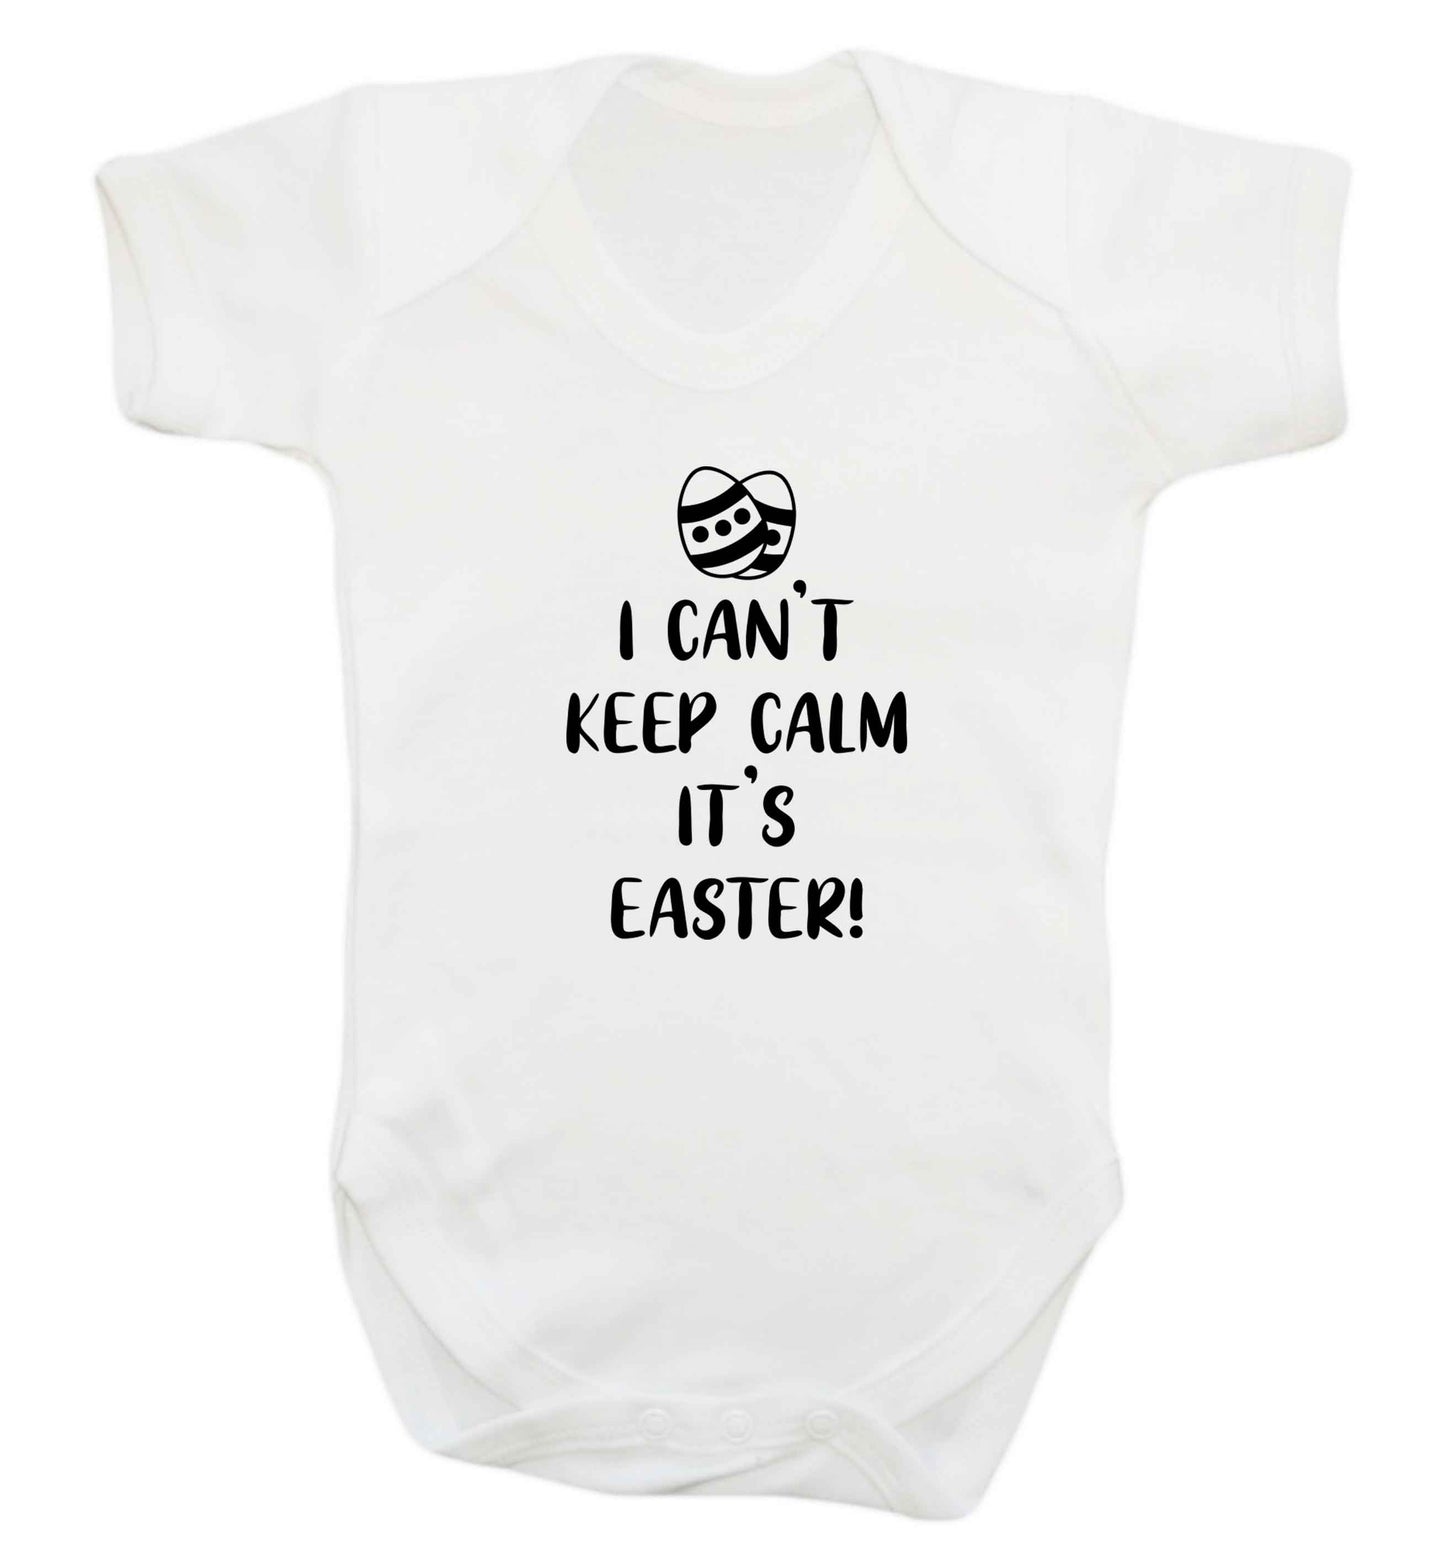 I can't keep calm it's Easter baby vest white 18-24 months